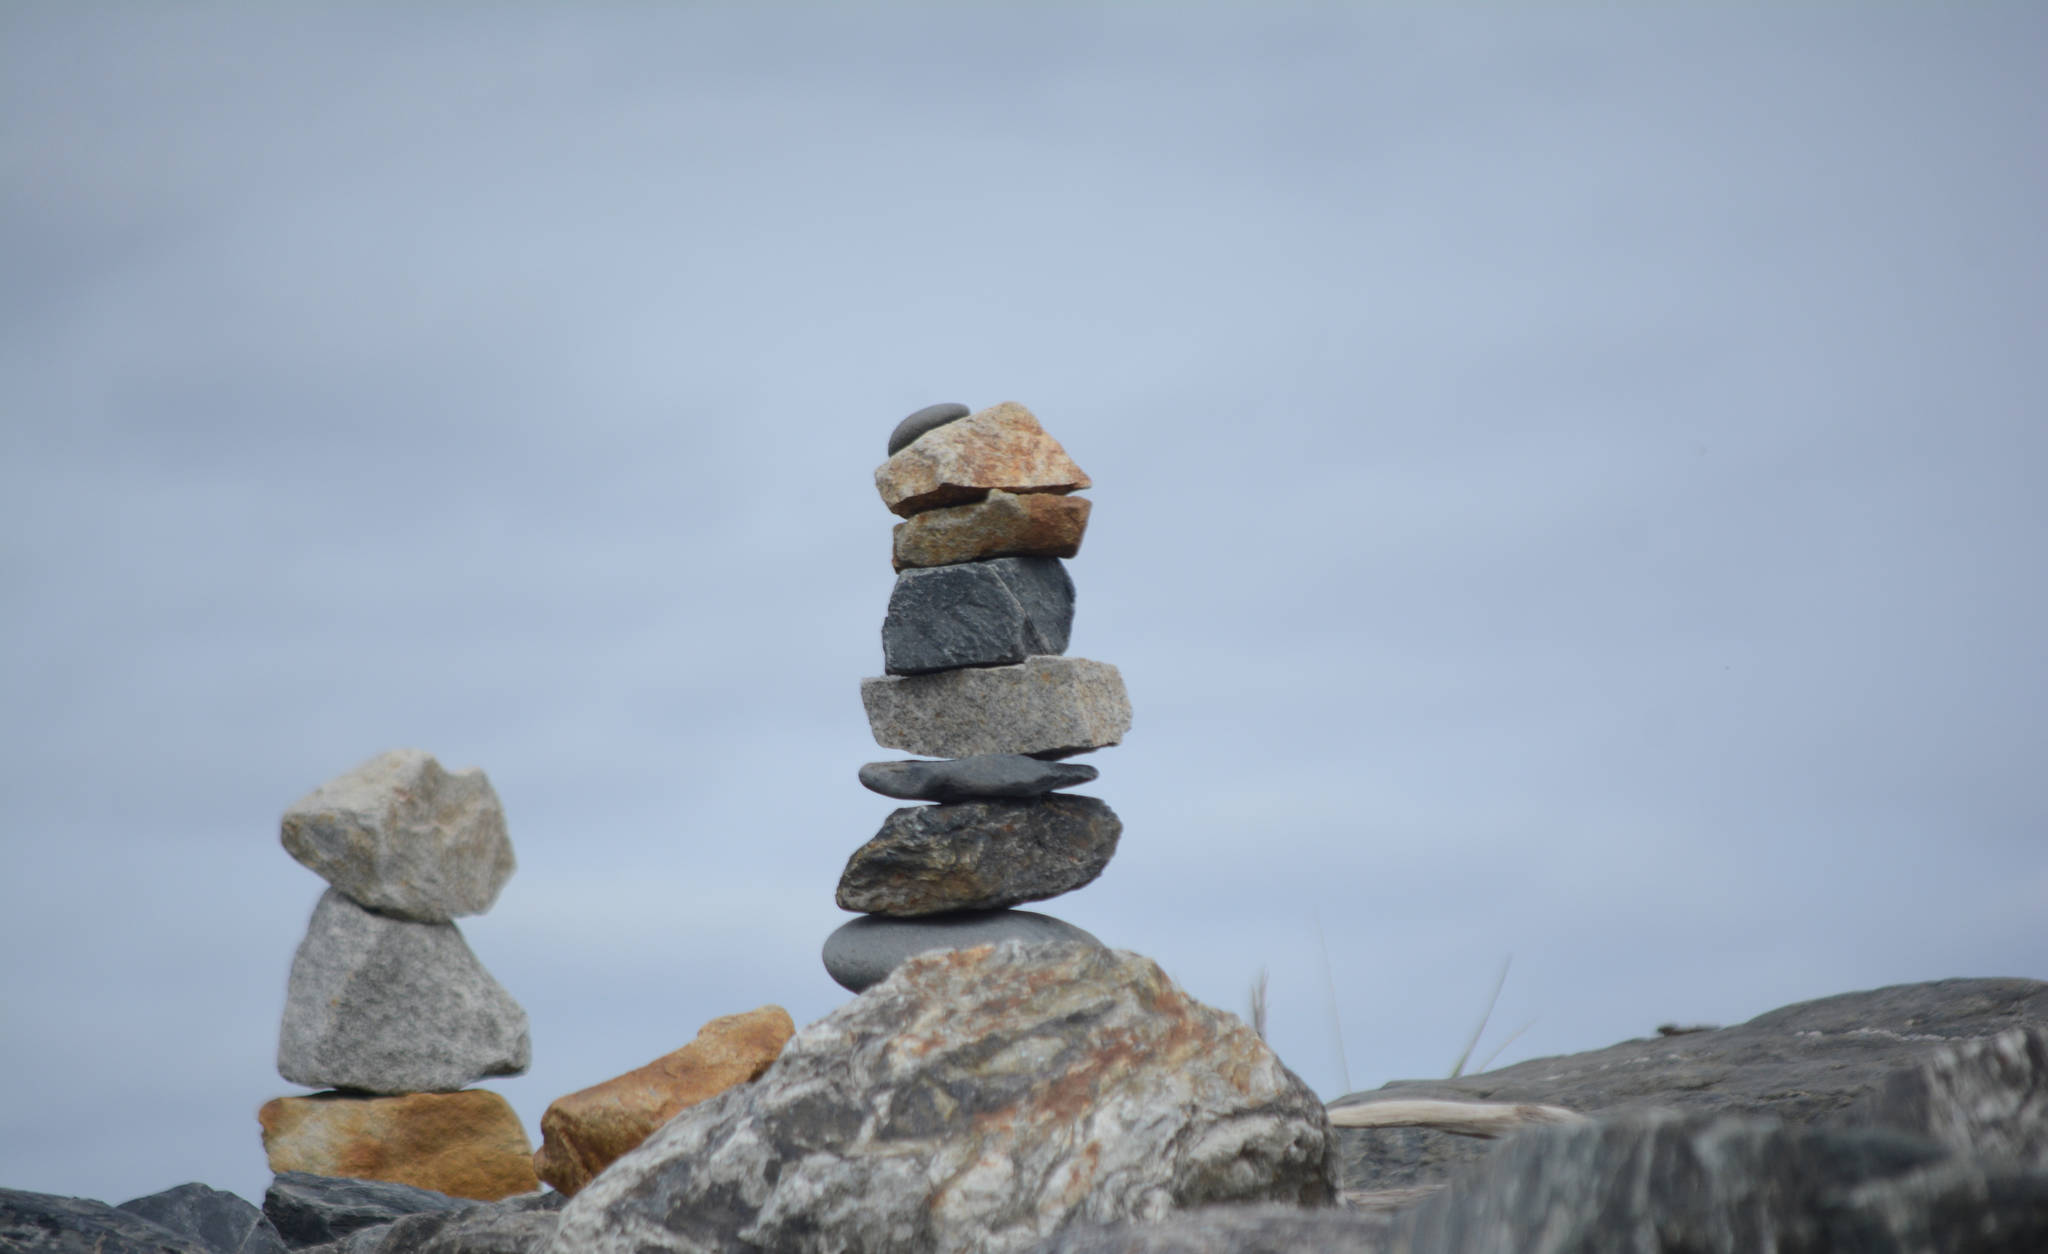 Two rock sculptures are part of dozens an artist made along the Homer Spit last week, as seen in this photo taken Friday, Sept. 21, 2018, in Homer, Alaska. (Photo by Michael Armstrong/Homer News)